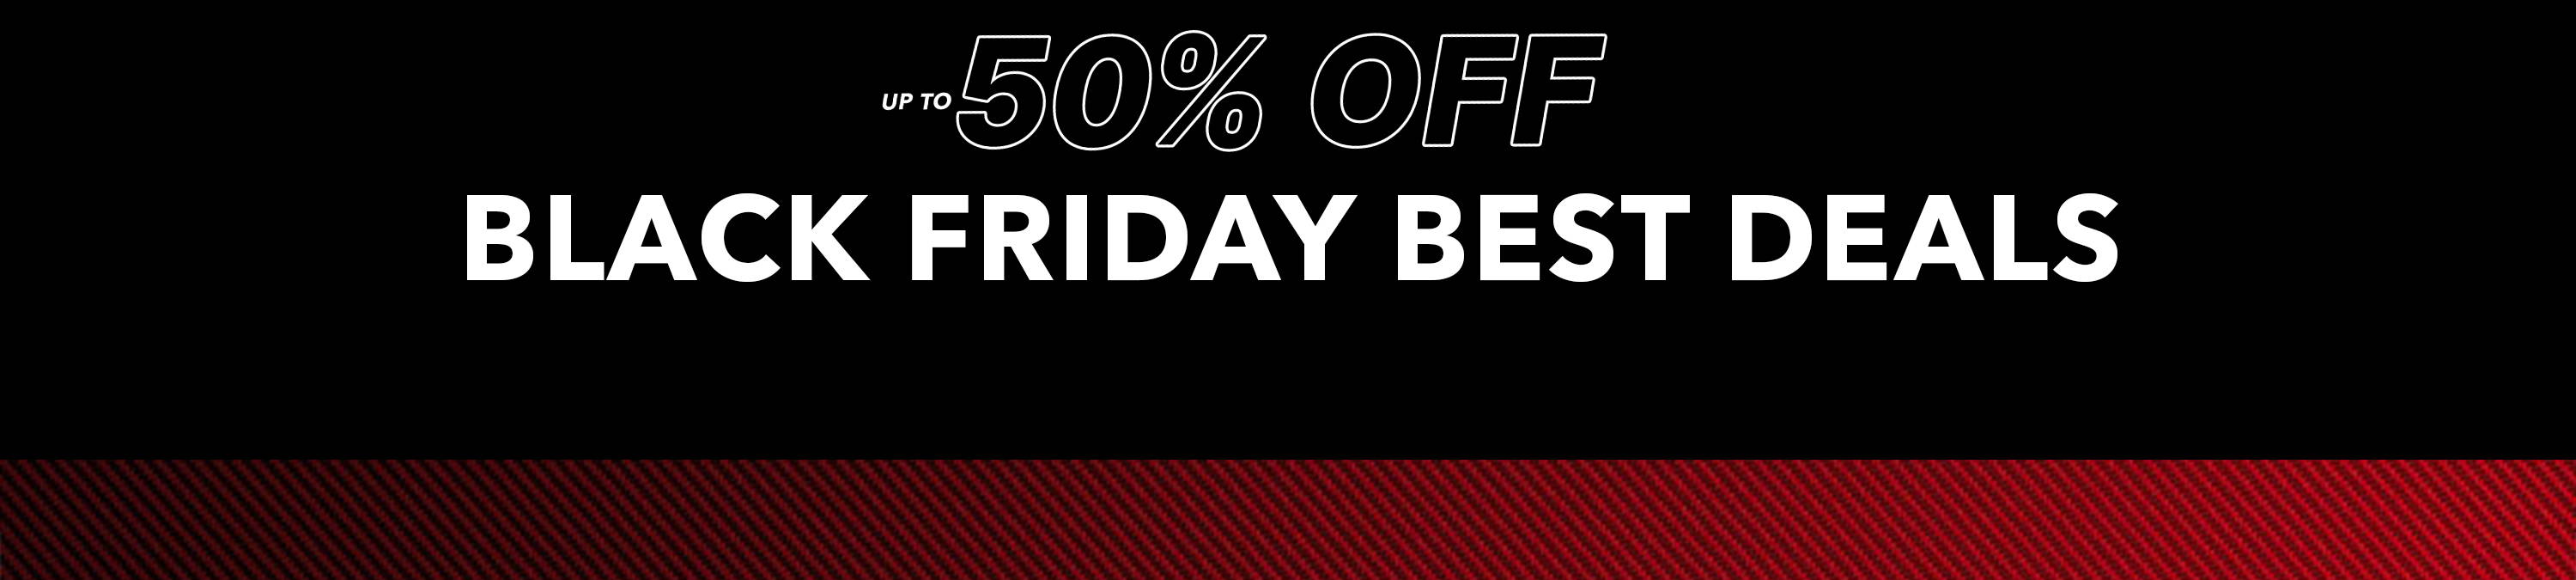 Black Friday Best Deals | Up to 50% Off